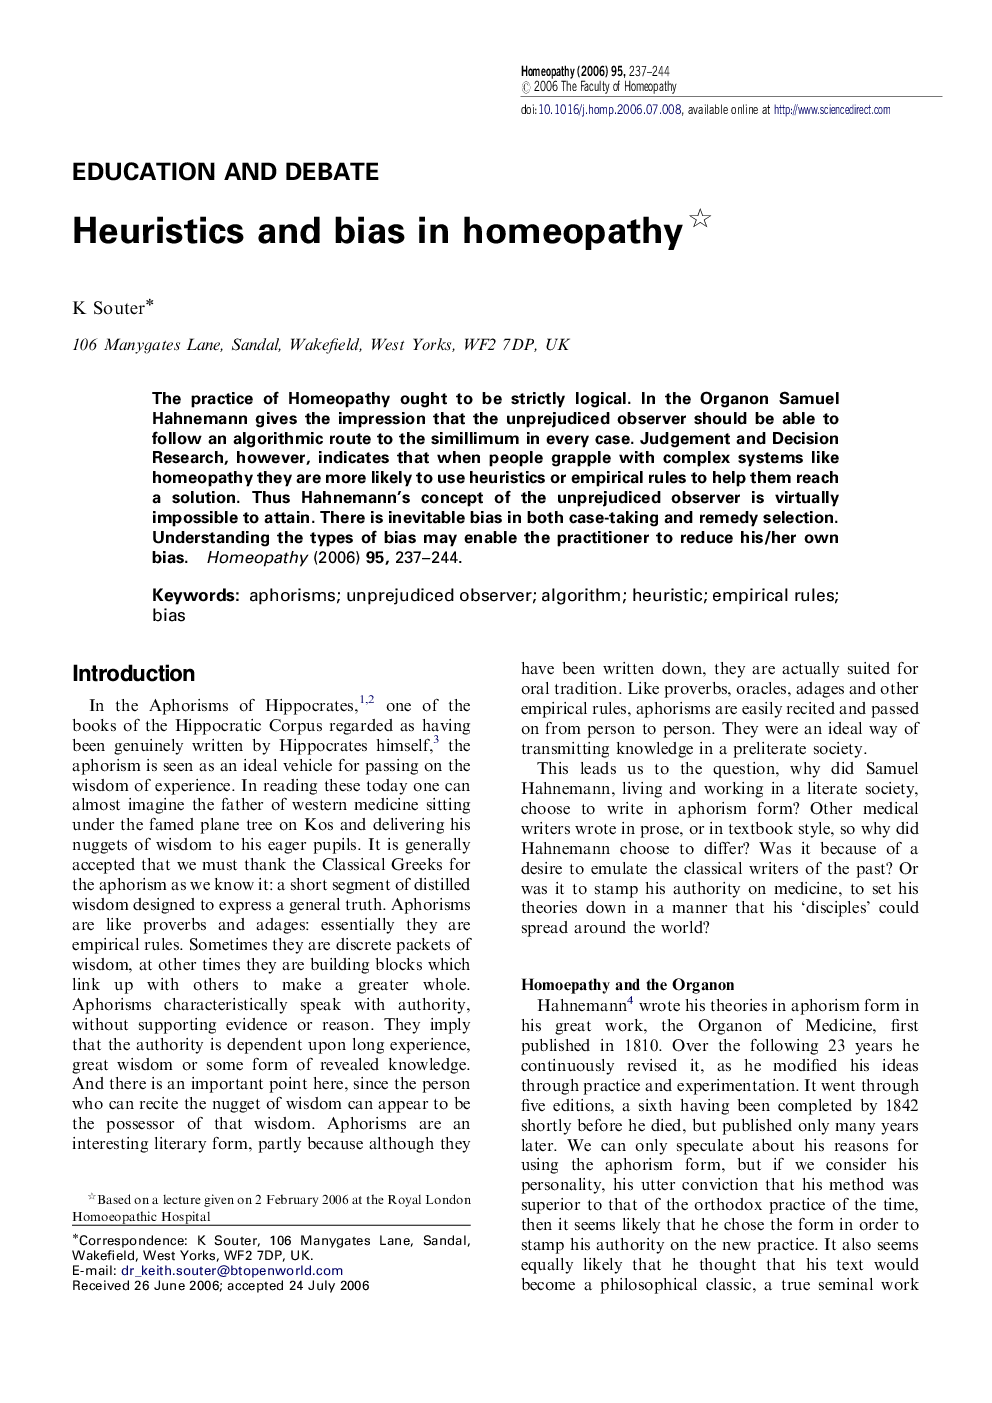 Heuristics and bias in homeopathy 